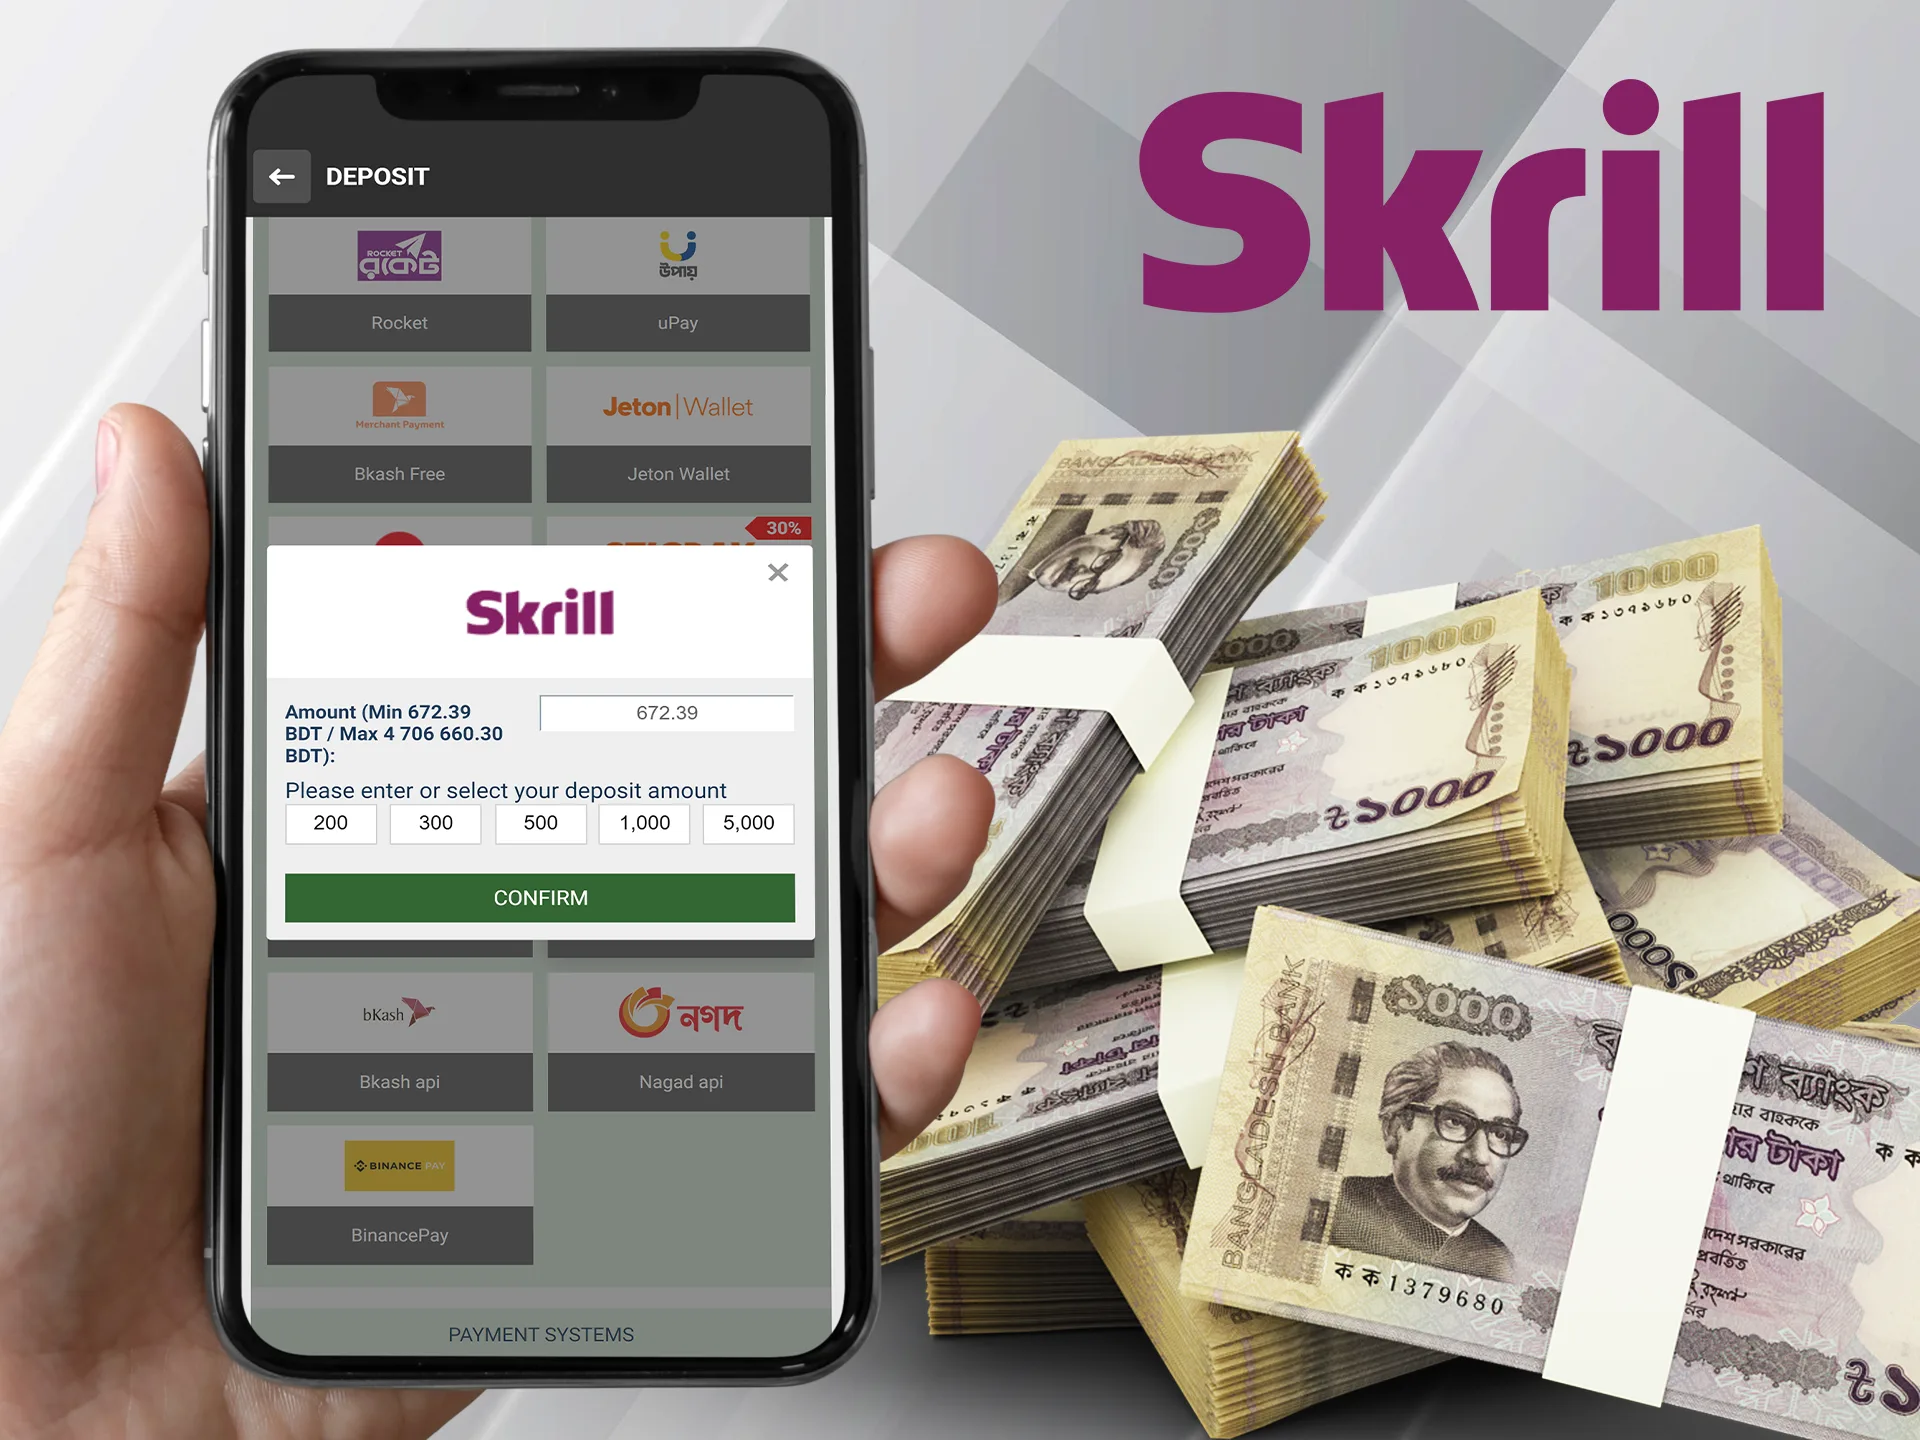 Bookmakers provide the option to make payments using Skrill.